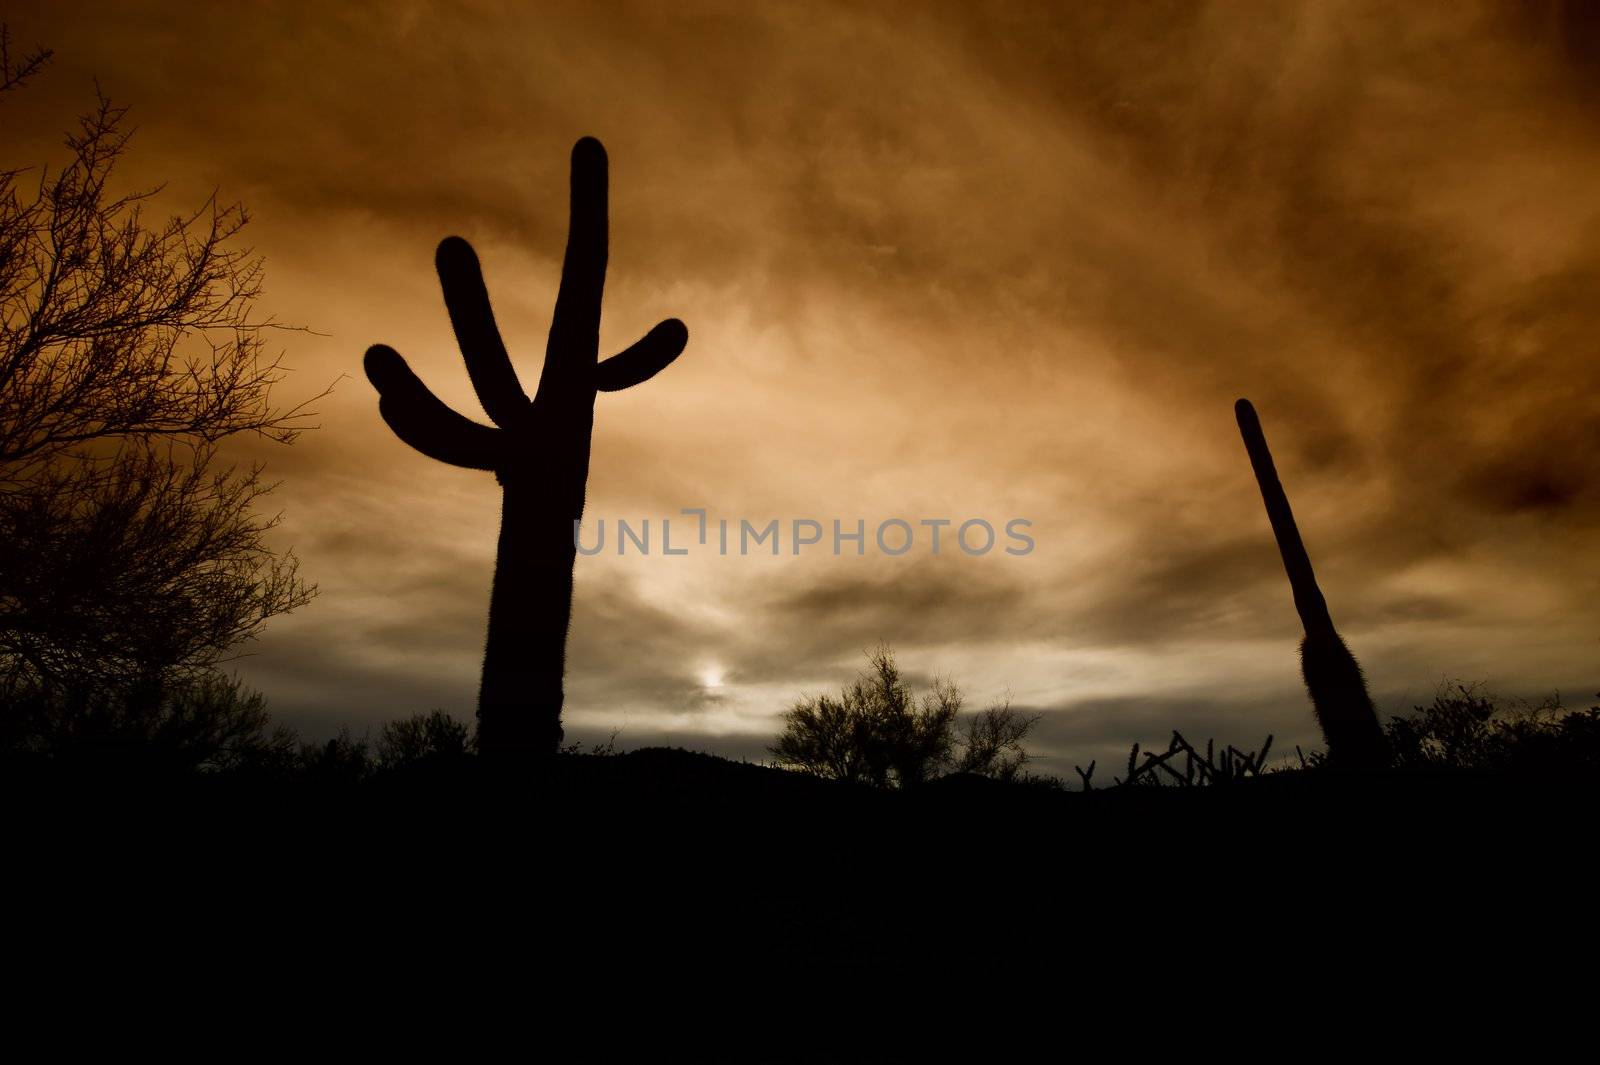 Saguaro cacti and other desert plants silhouetted against a cloudy sky at sunset.